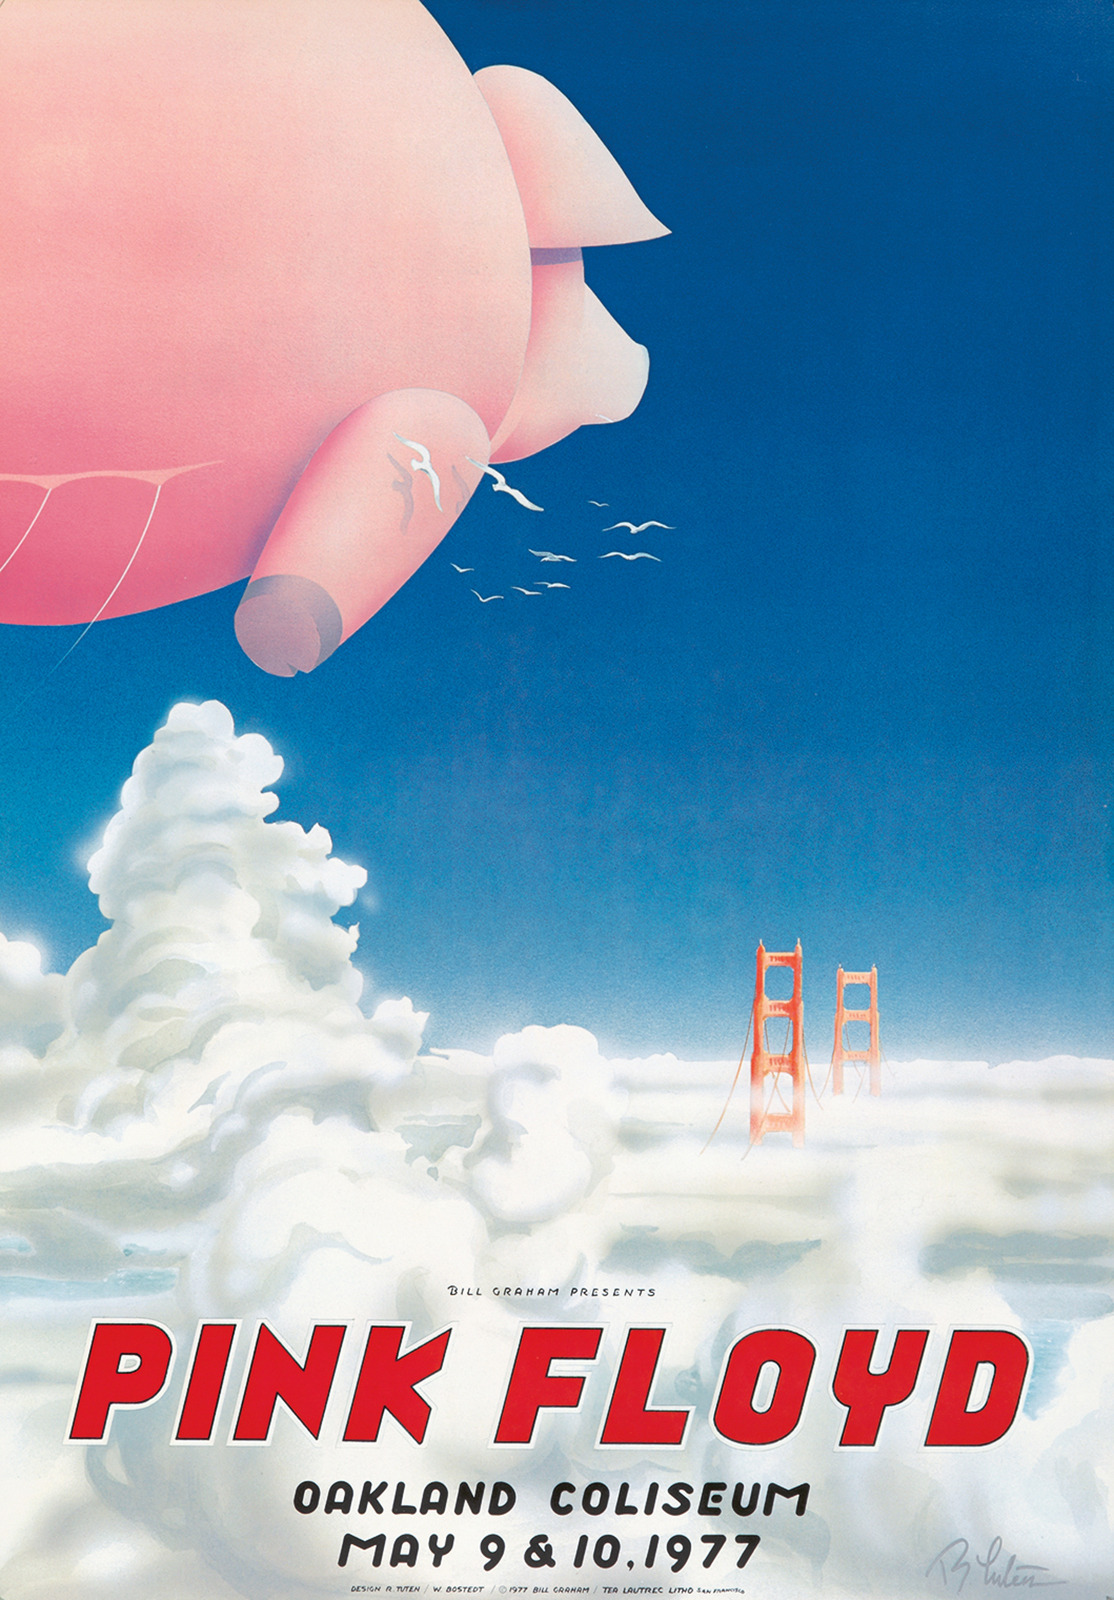 Pink Floyd concert poster - Oakland Coliseum, Oakland California U.S.A. - May 9 and 10, 1977